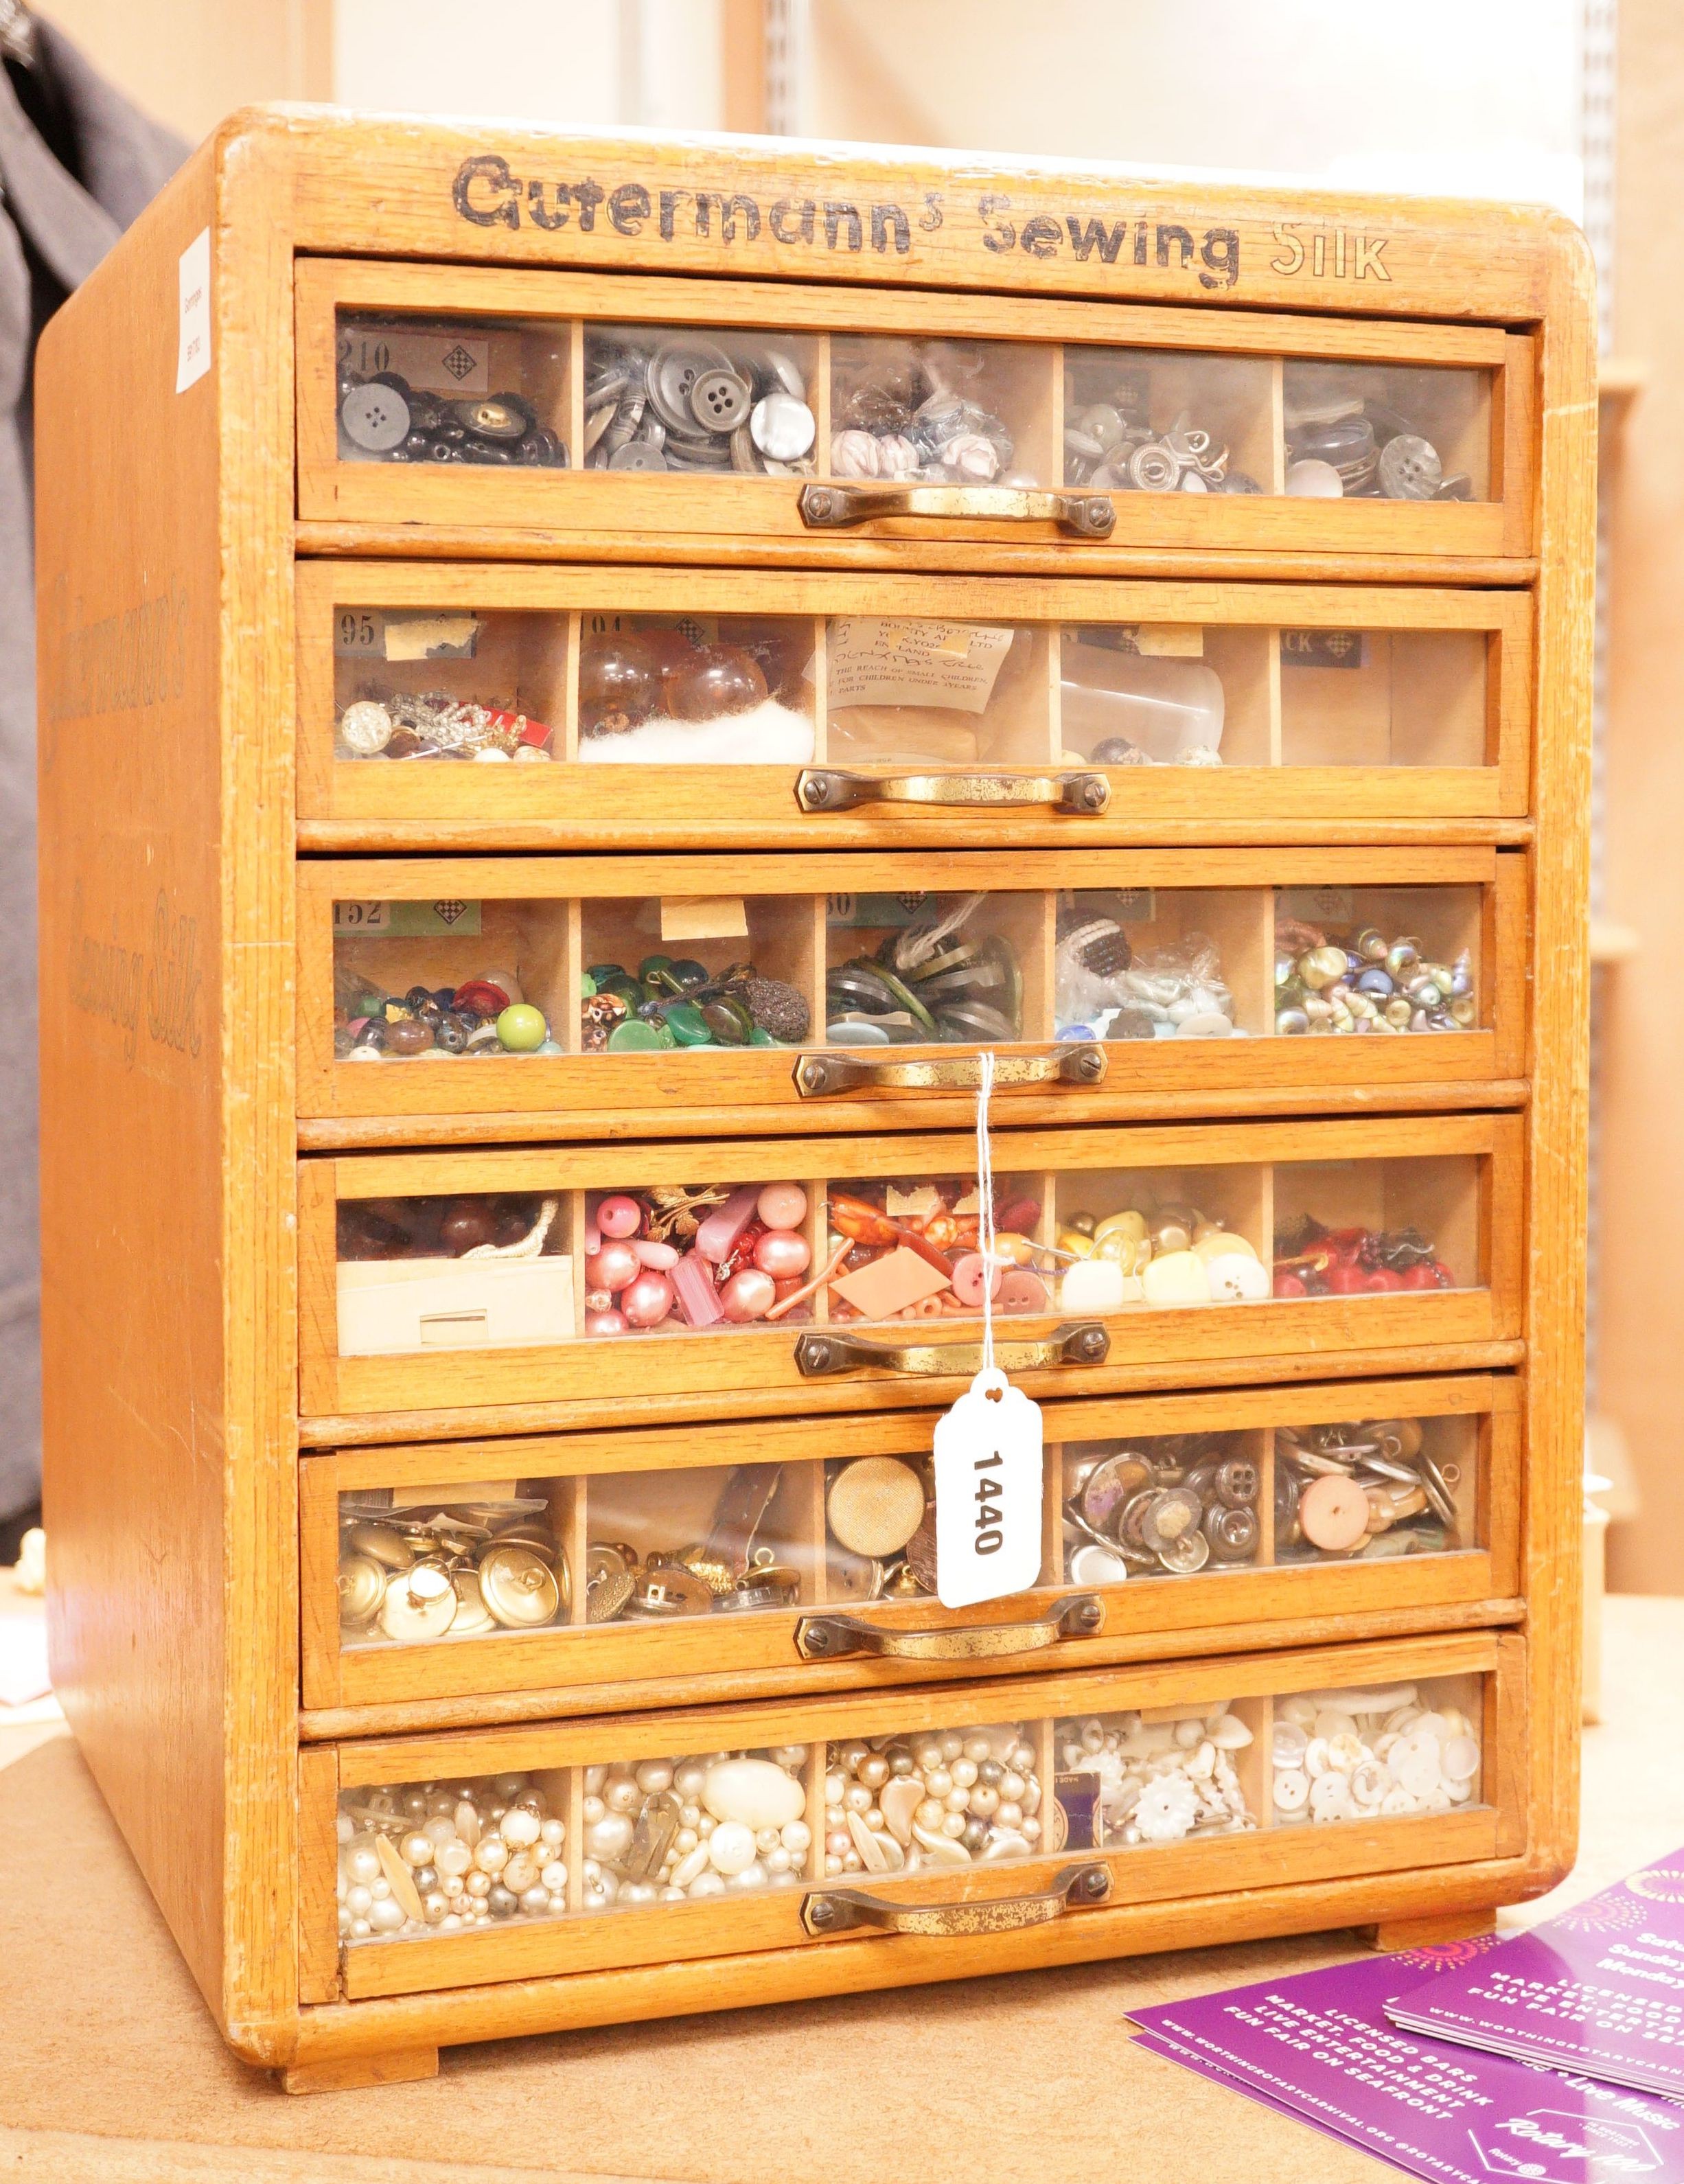 A 'Gutermann's Sewing Silk' merchants display case with contents